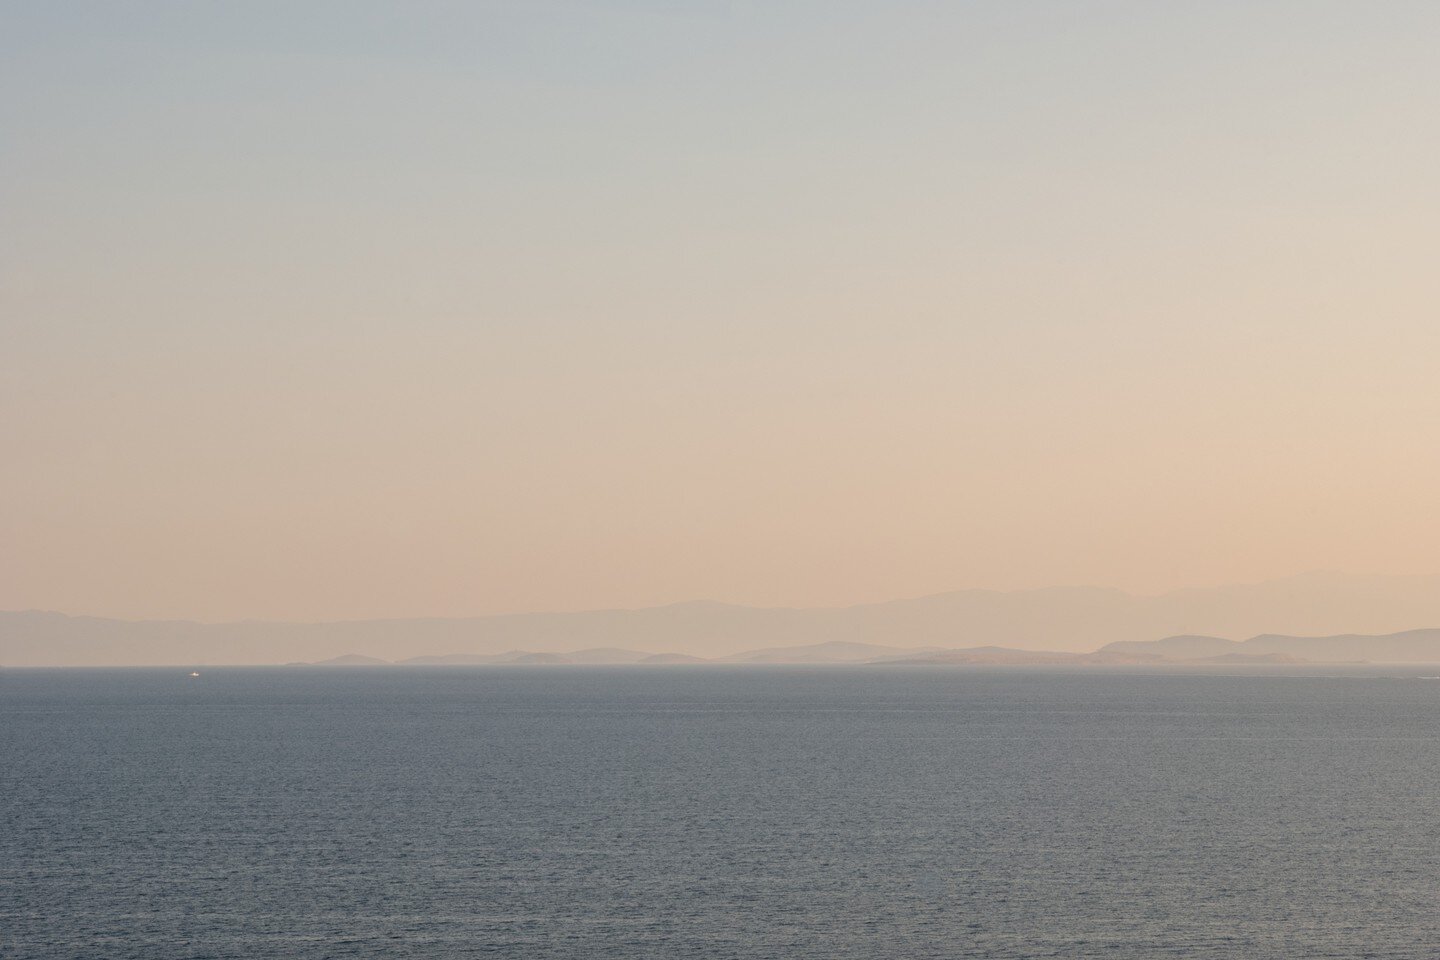 The same seascape across time, looking east from Lesvos to Turkey, 21 x 14 in, c-prints, 2018-2020. The poem is titled Translate. 

#landscapephotography #lesvos #refugeesupport